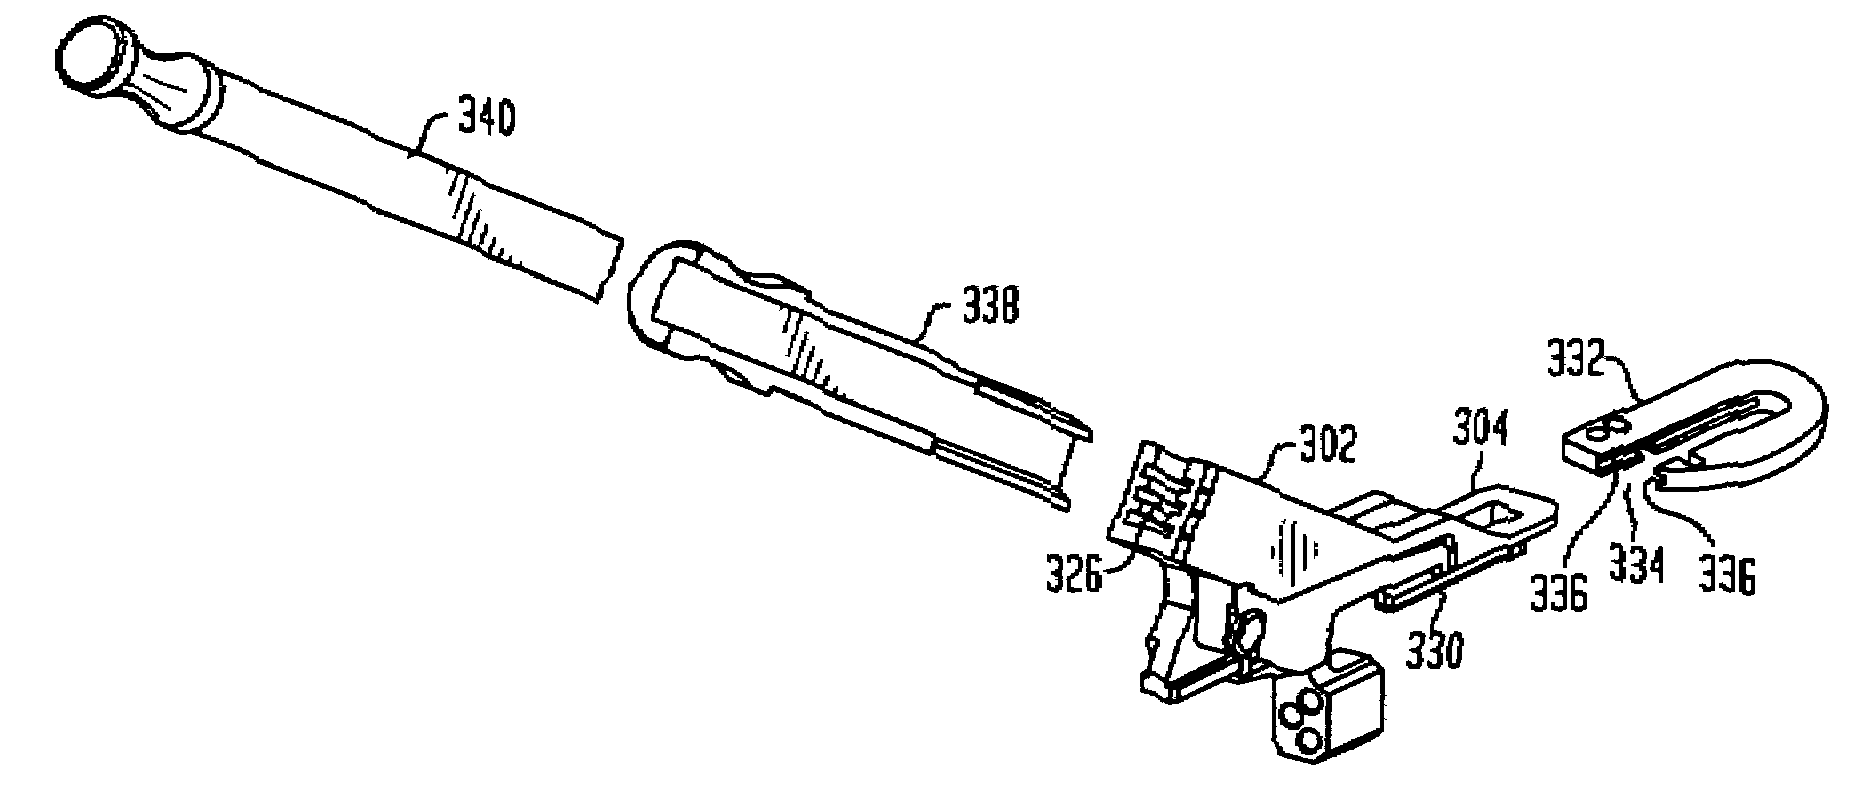 Unicondylar knee implants and insertion methods therefor